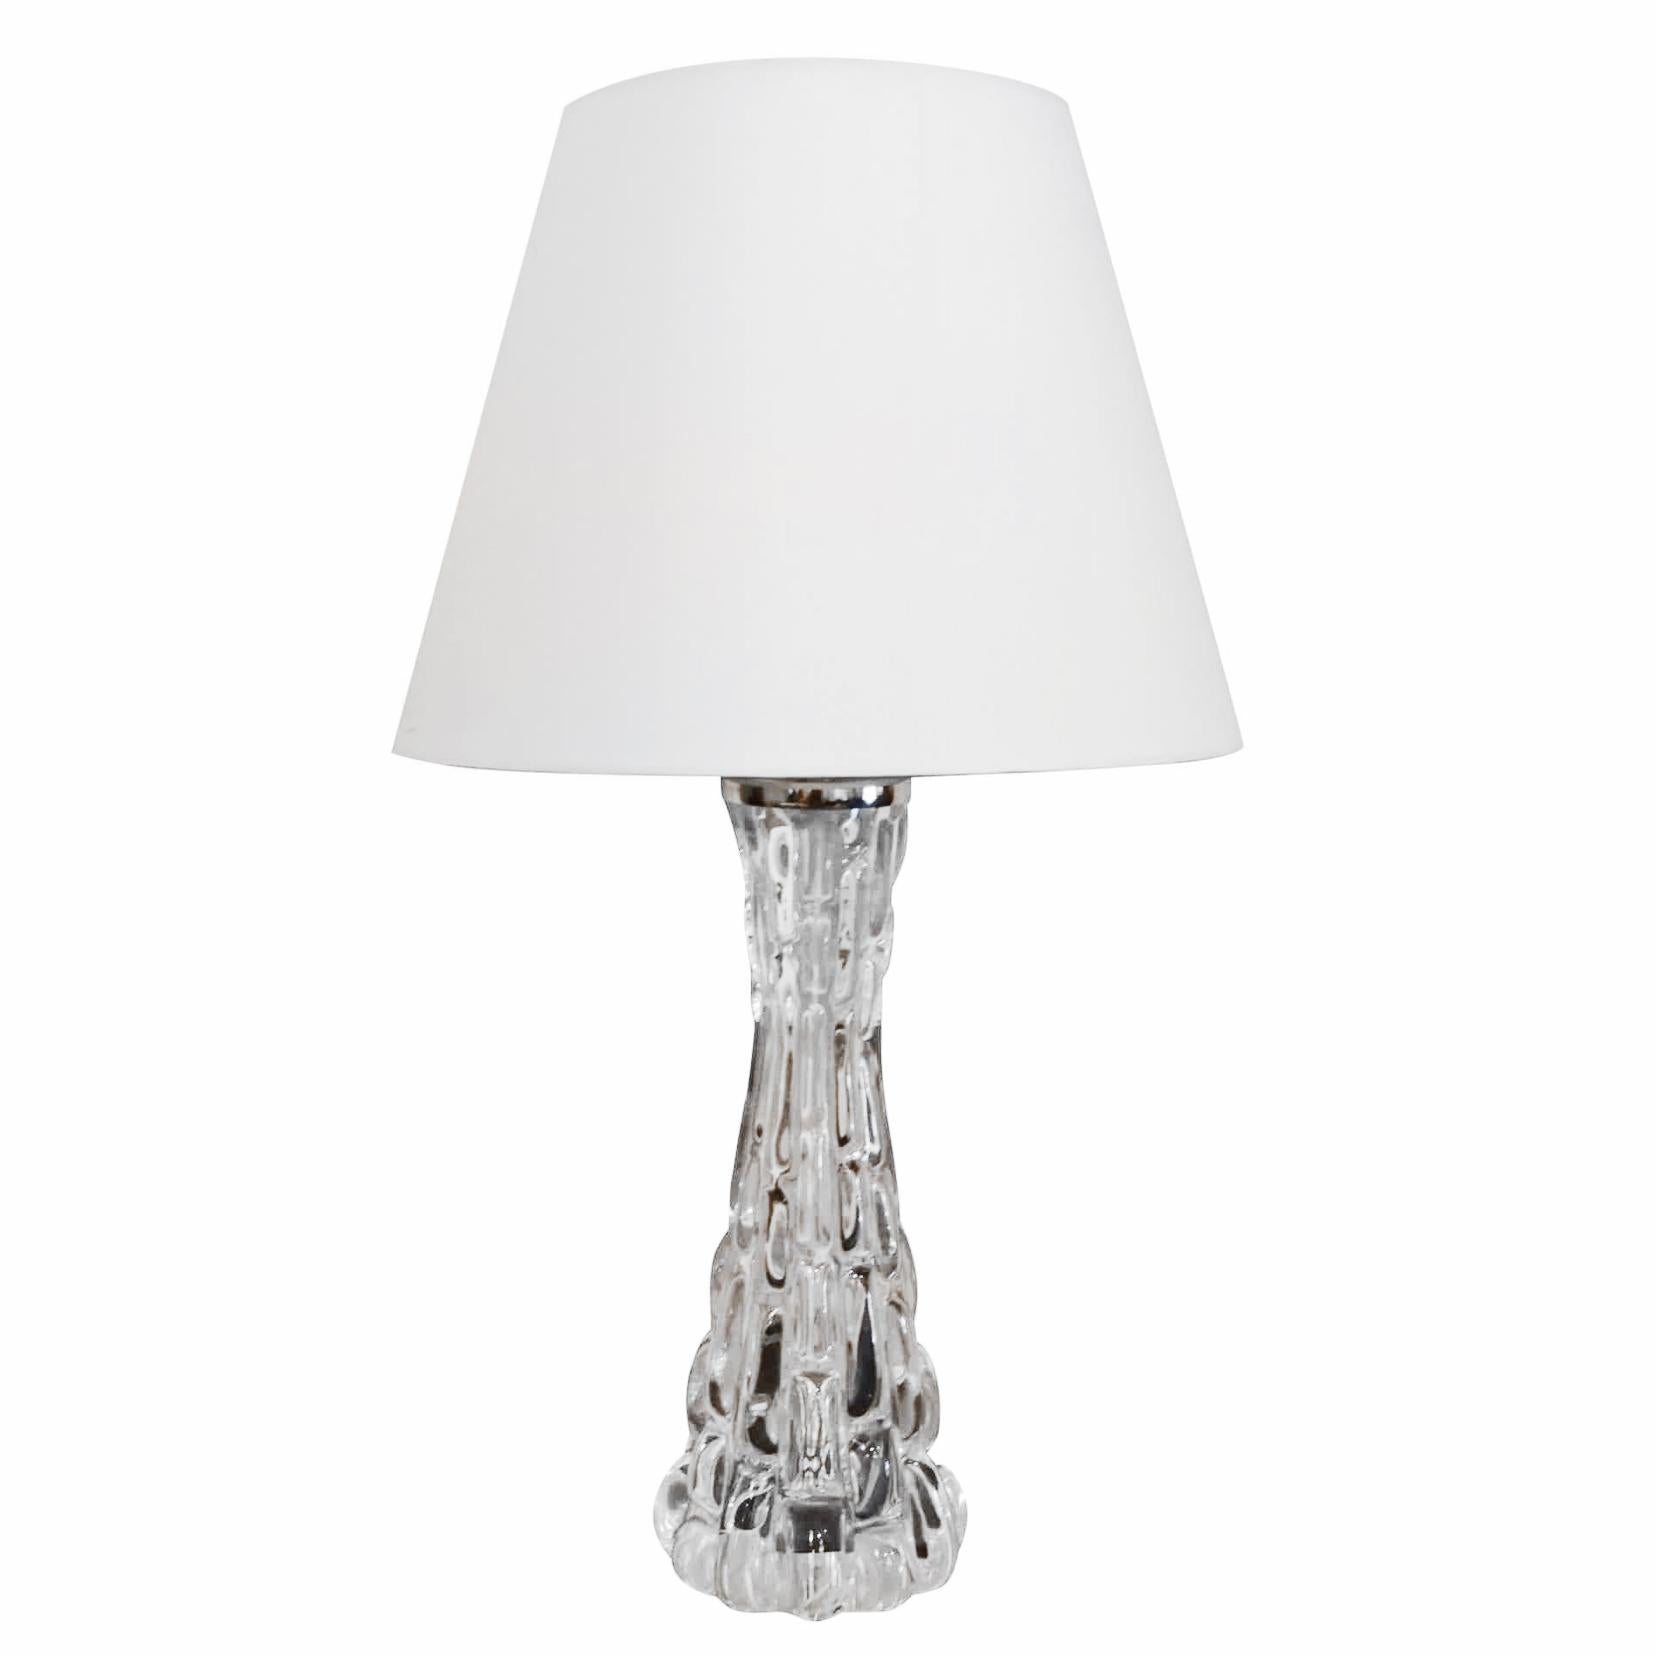 A vintage Mid-Century Modern Swedish table lamp made of hand blown Orrefors, cut glass with a white shade, featuring a one light socket. The Scandinavian desk light was designed by Carl Fagerlund and produced by Orrefors, in good condition. Signed